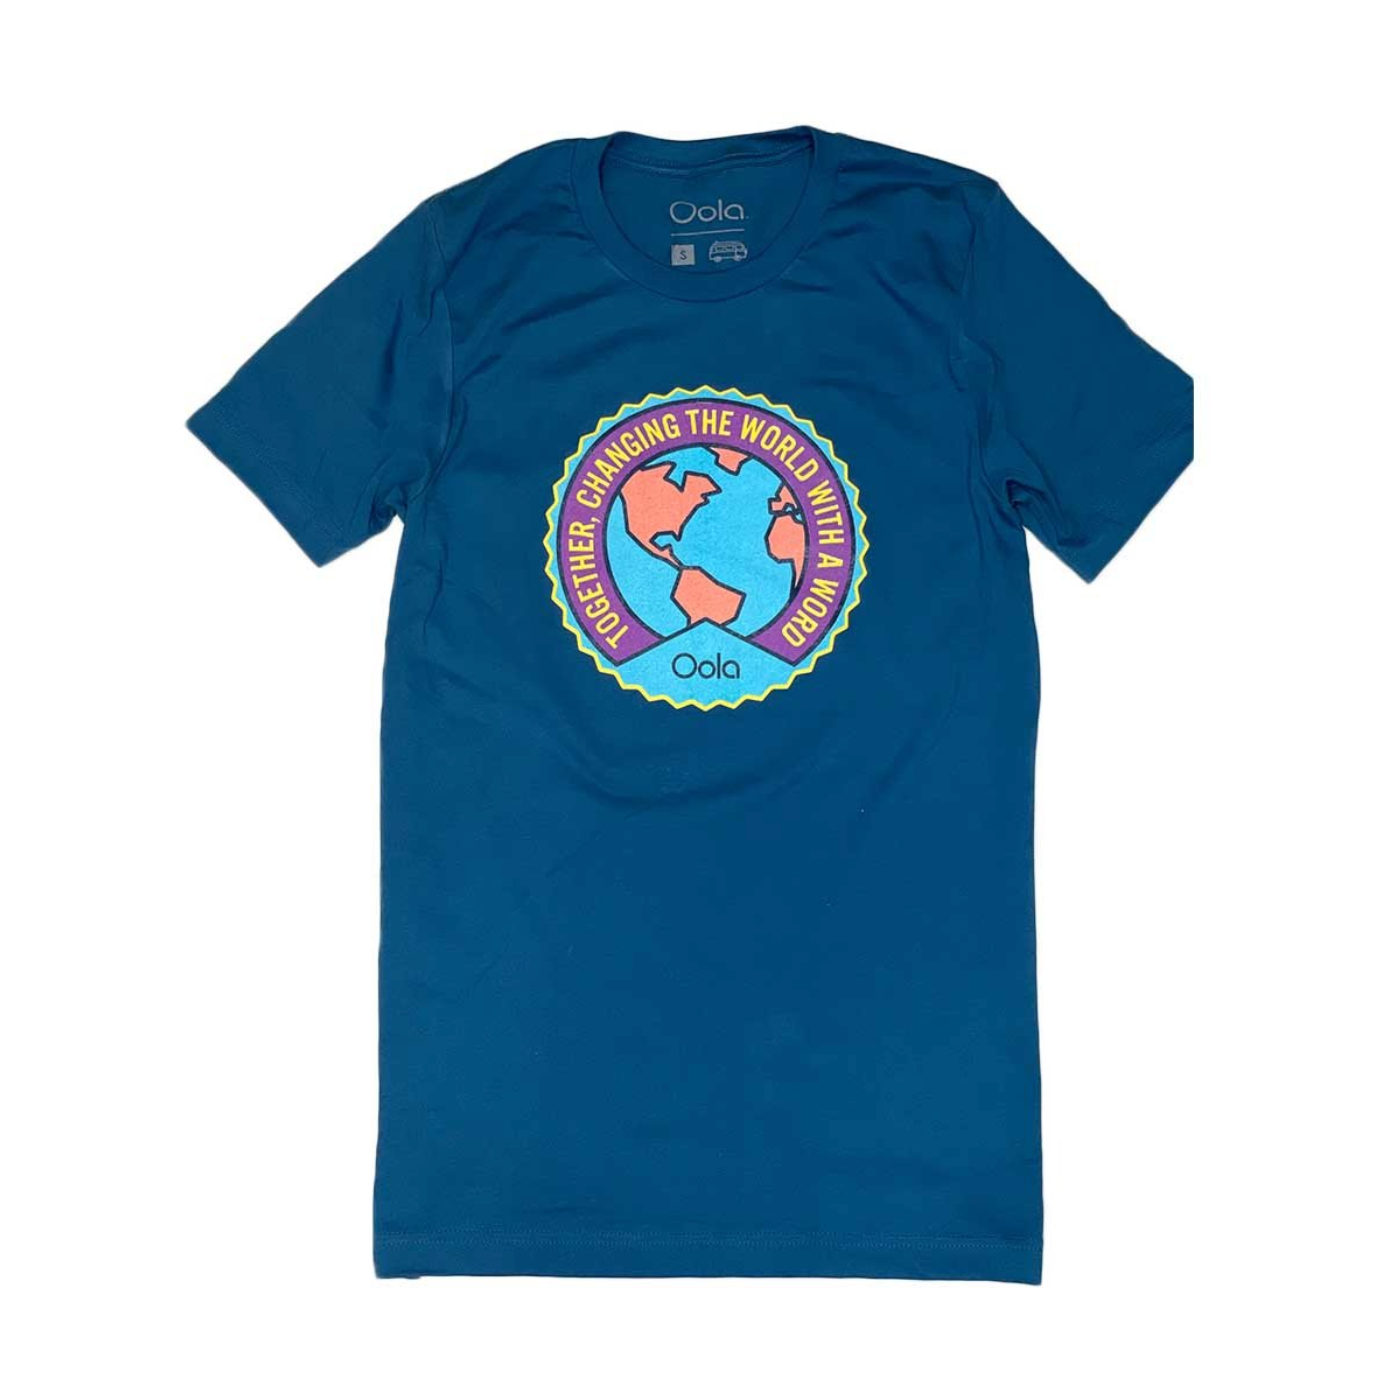 Teal Unisex TOGETHER CHANGING THE WORLD Short-Sleeve